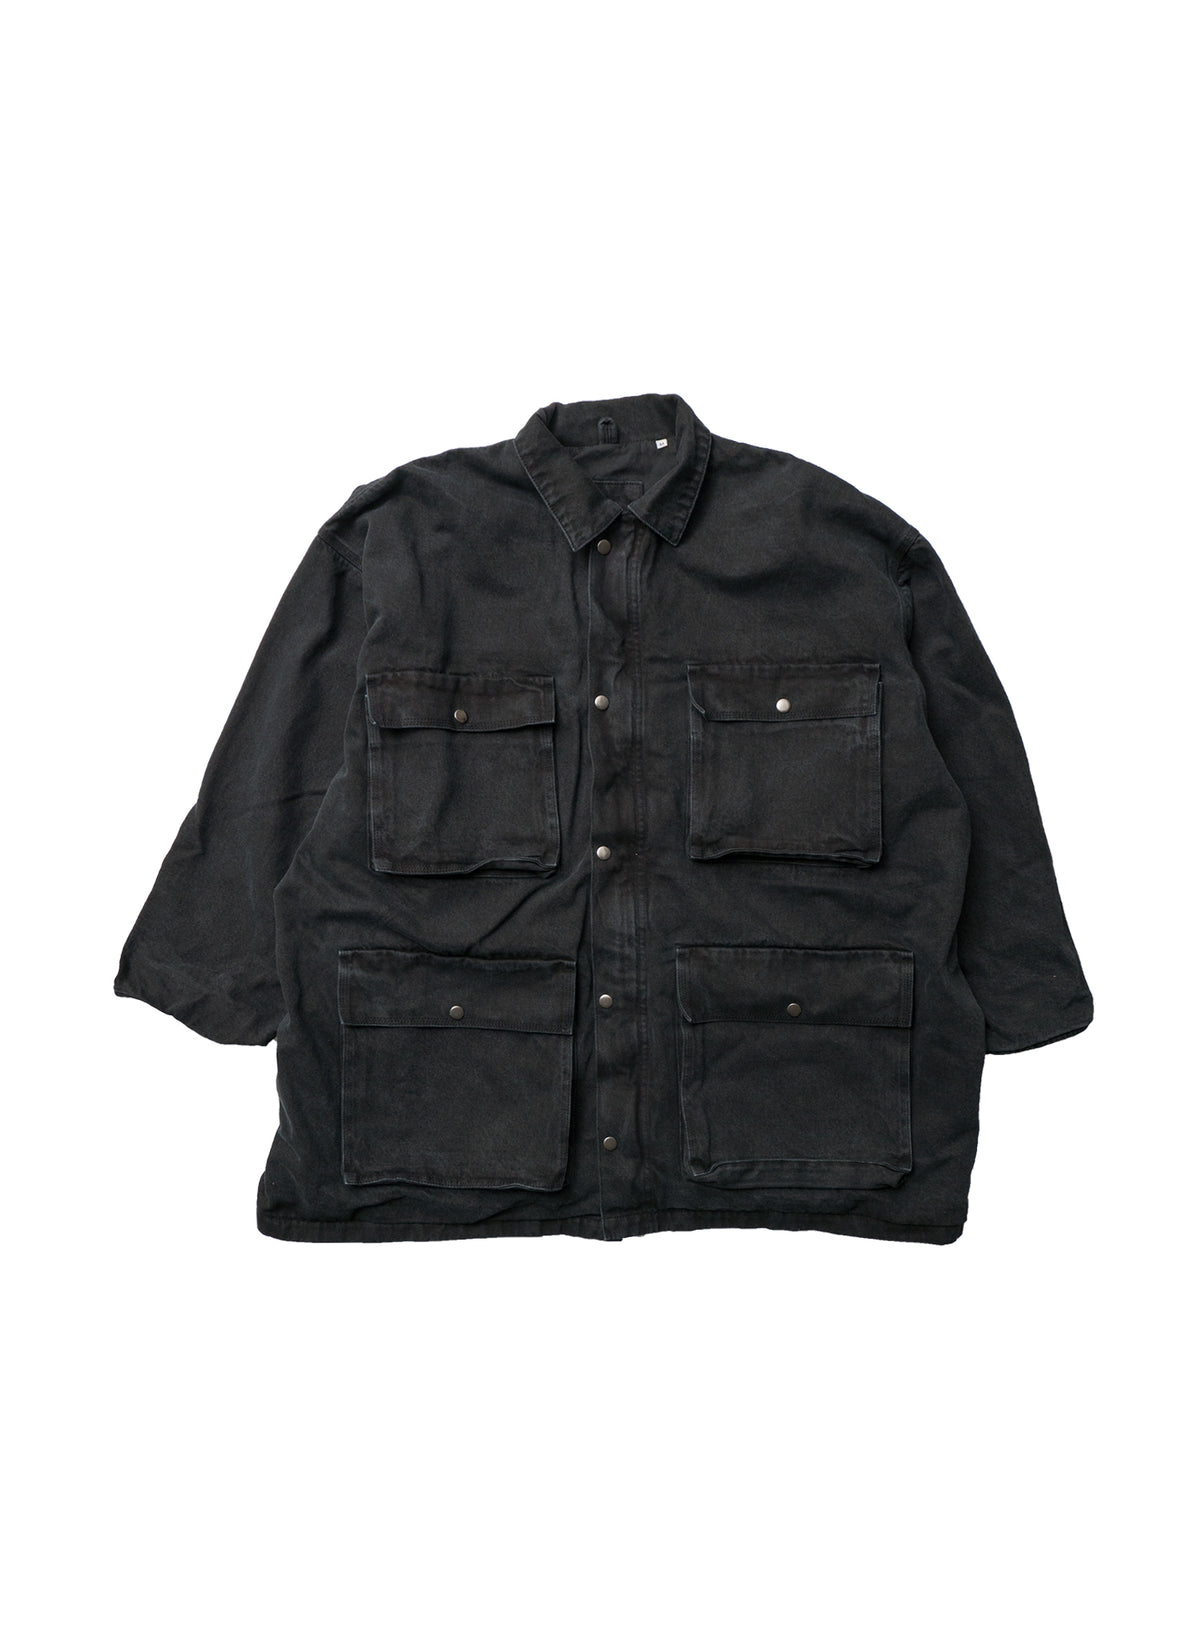 <span style="color: #f50b0b;">Last One</span> 【RESTOCK】WILLY CHAVARRIA / WILLY MONSTER CARGO JACKET WASHED DENIM BLACK